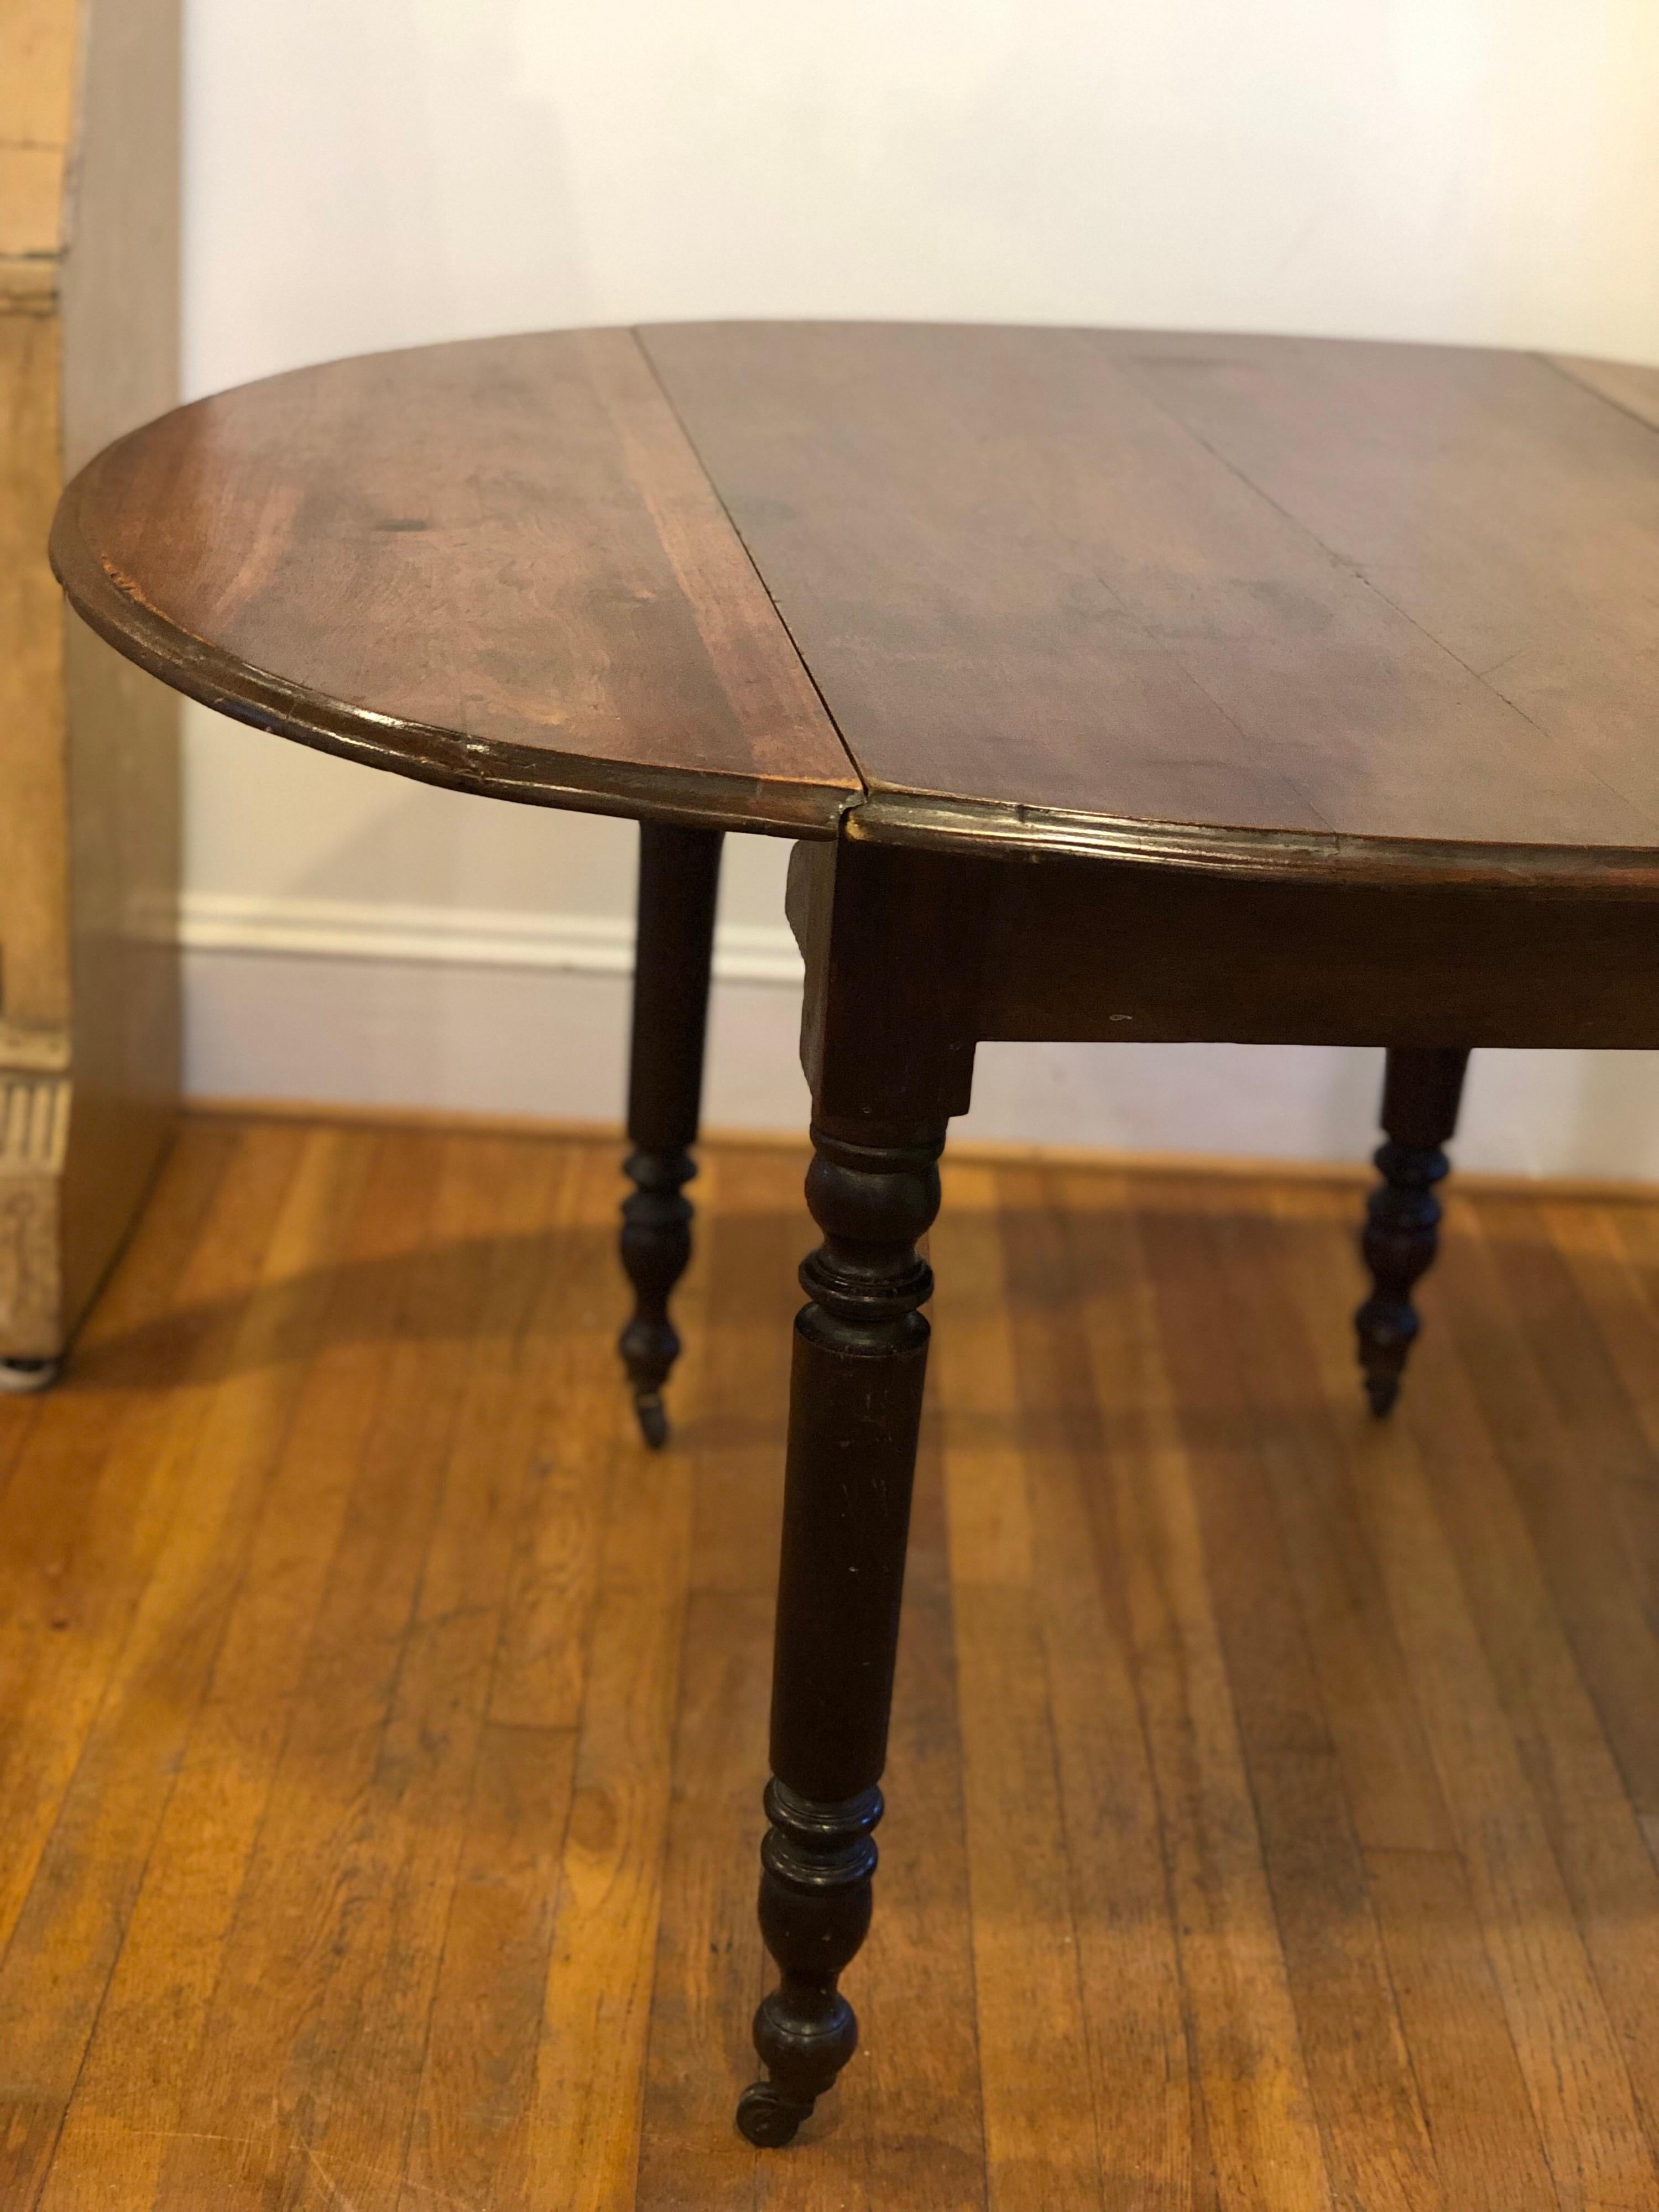 A beautiful example of early English walnut furniture with lovely color, beautiful ageing and with centre panel two drop leaves and fold out arms. Each turned leg has original castor on the feet.

Table is in overall good used condition for age